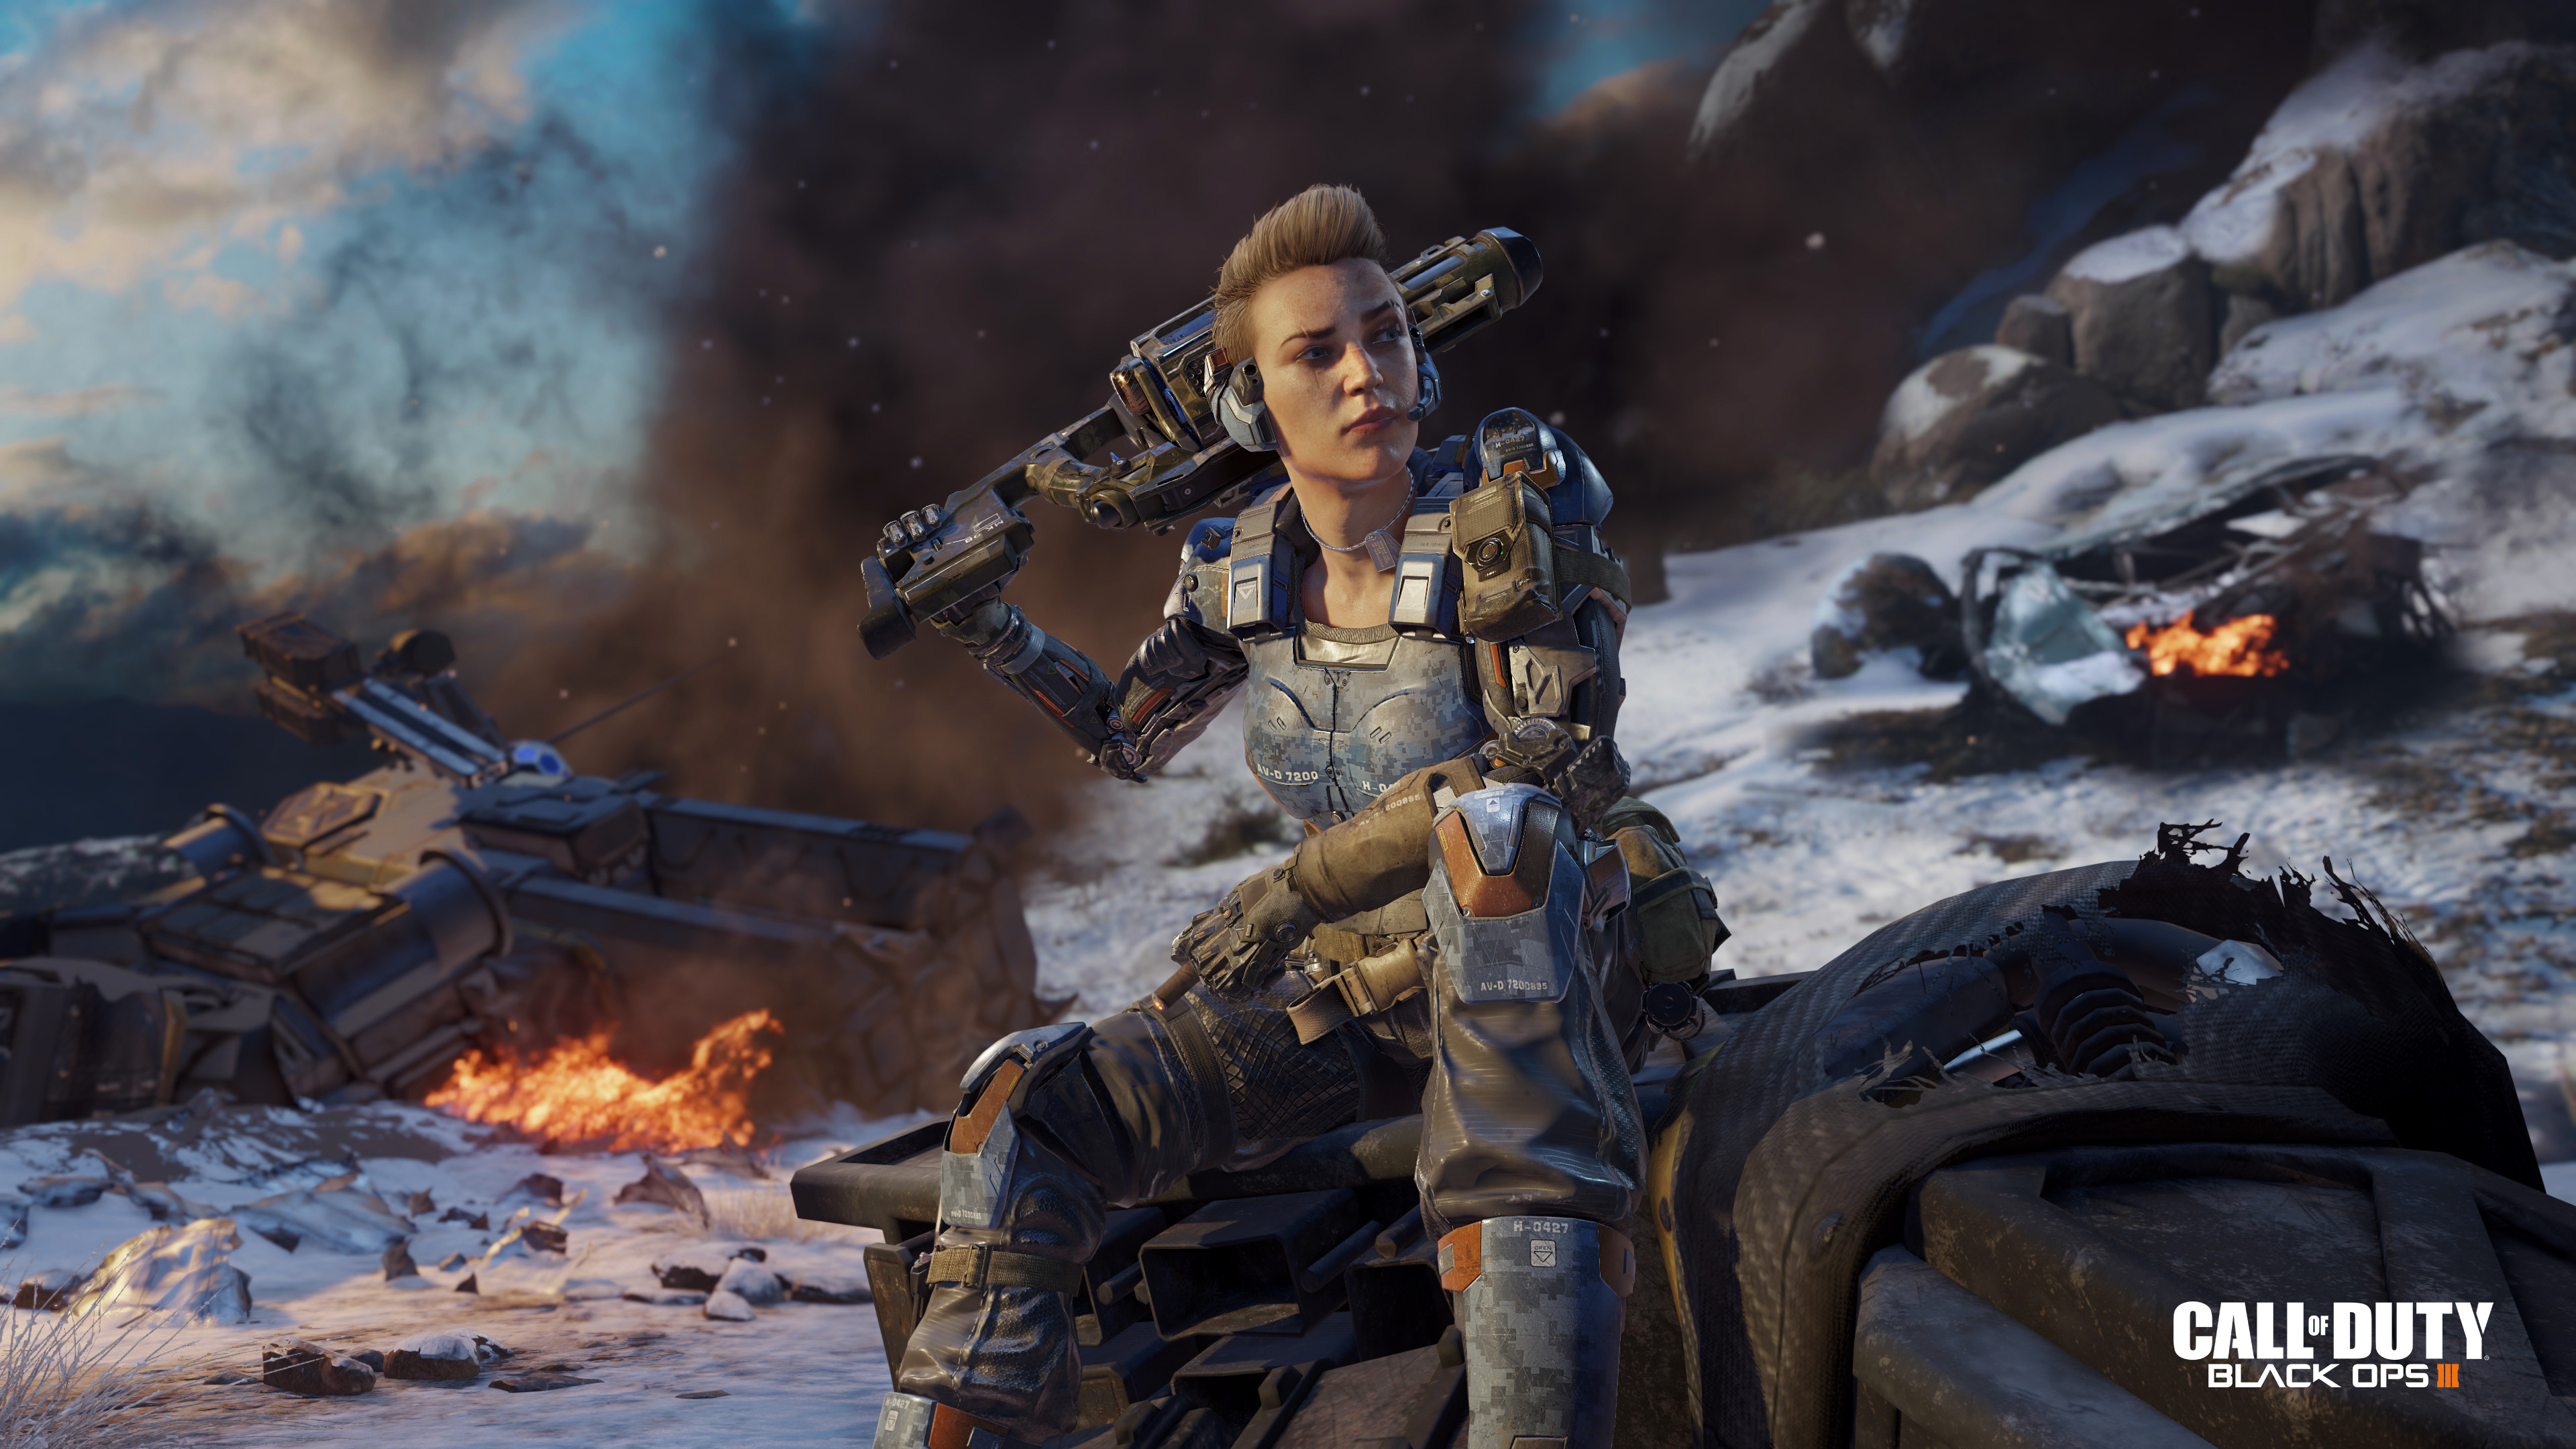 3840x2160 ... call of duty black ops 3 hd wallpapers free download ...